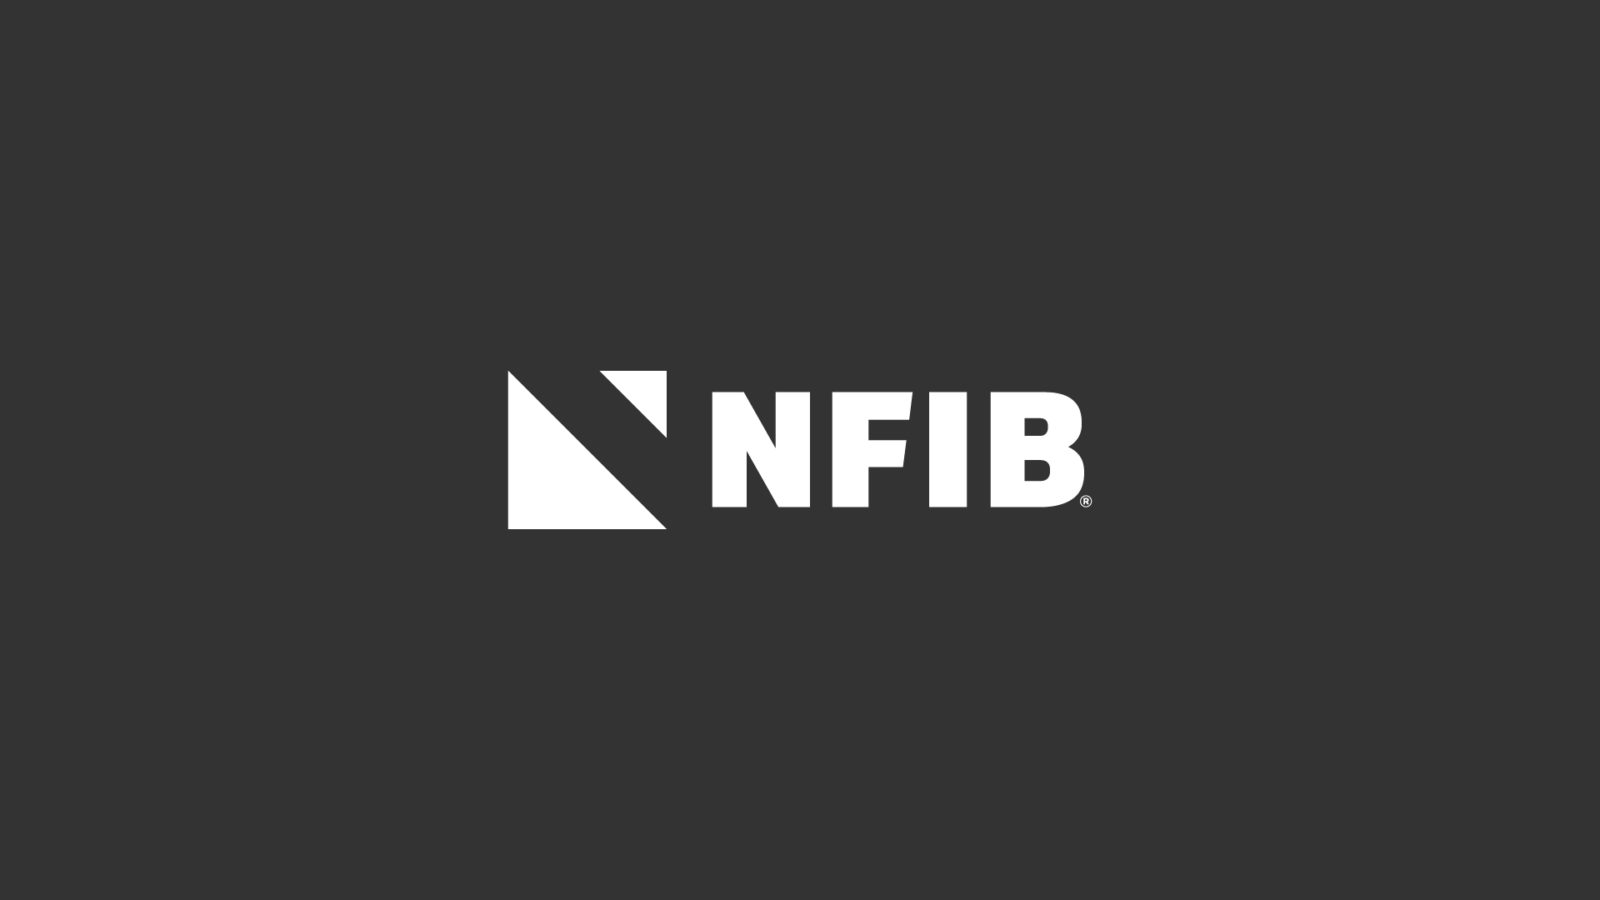 NFIB Independent and Small Business Association Branding and Strategy Logo